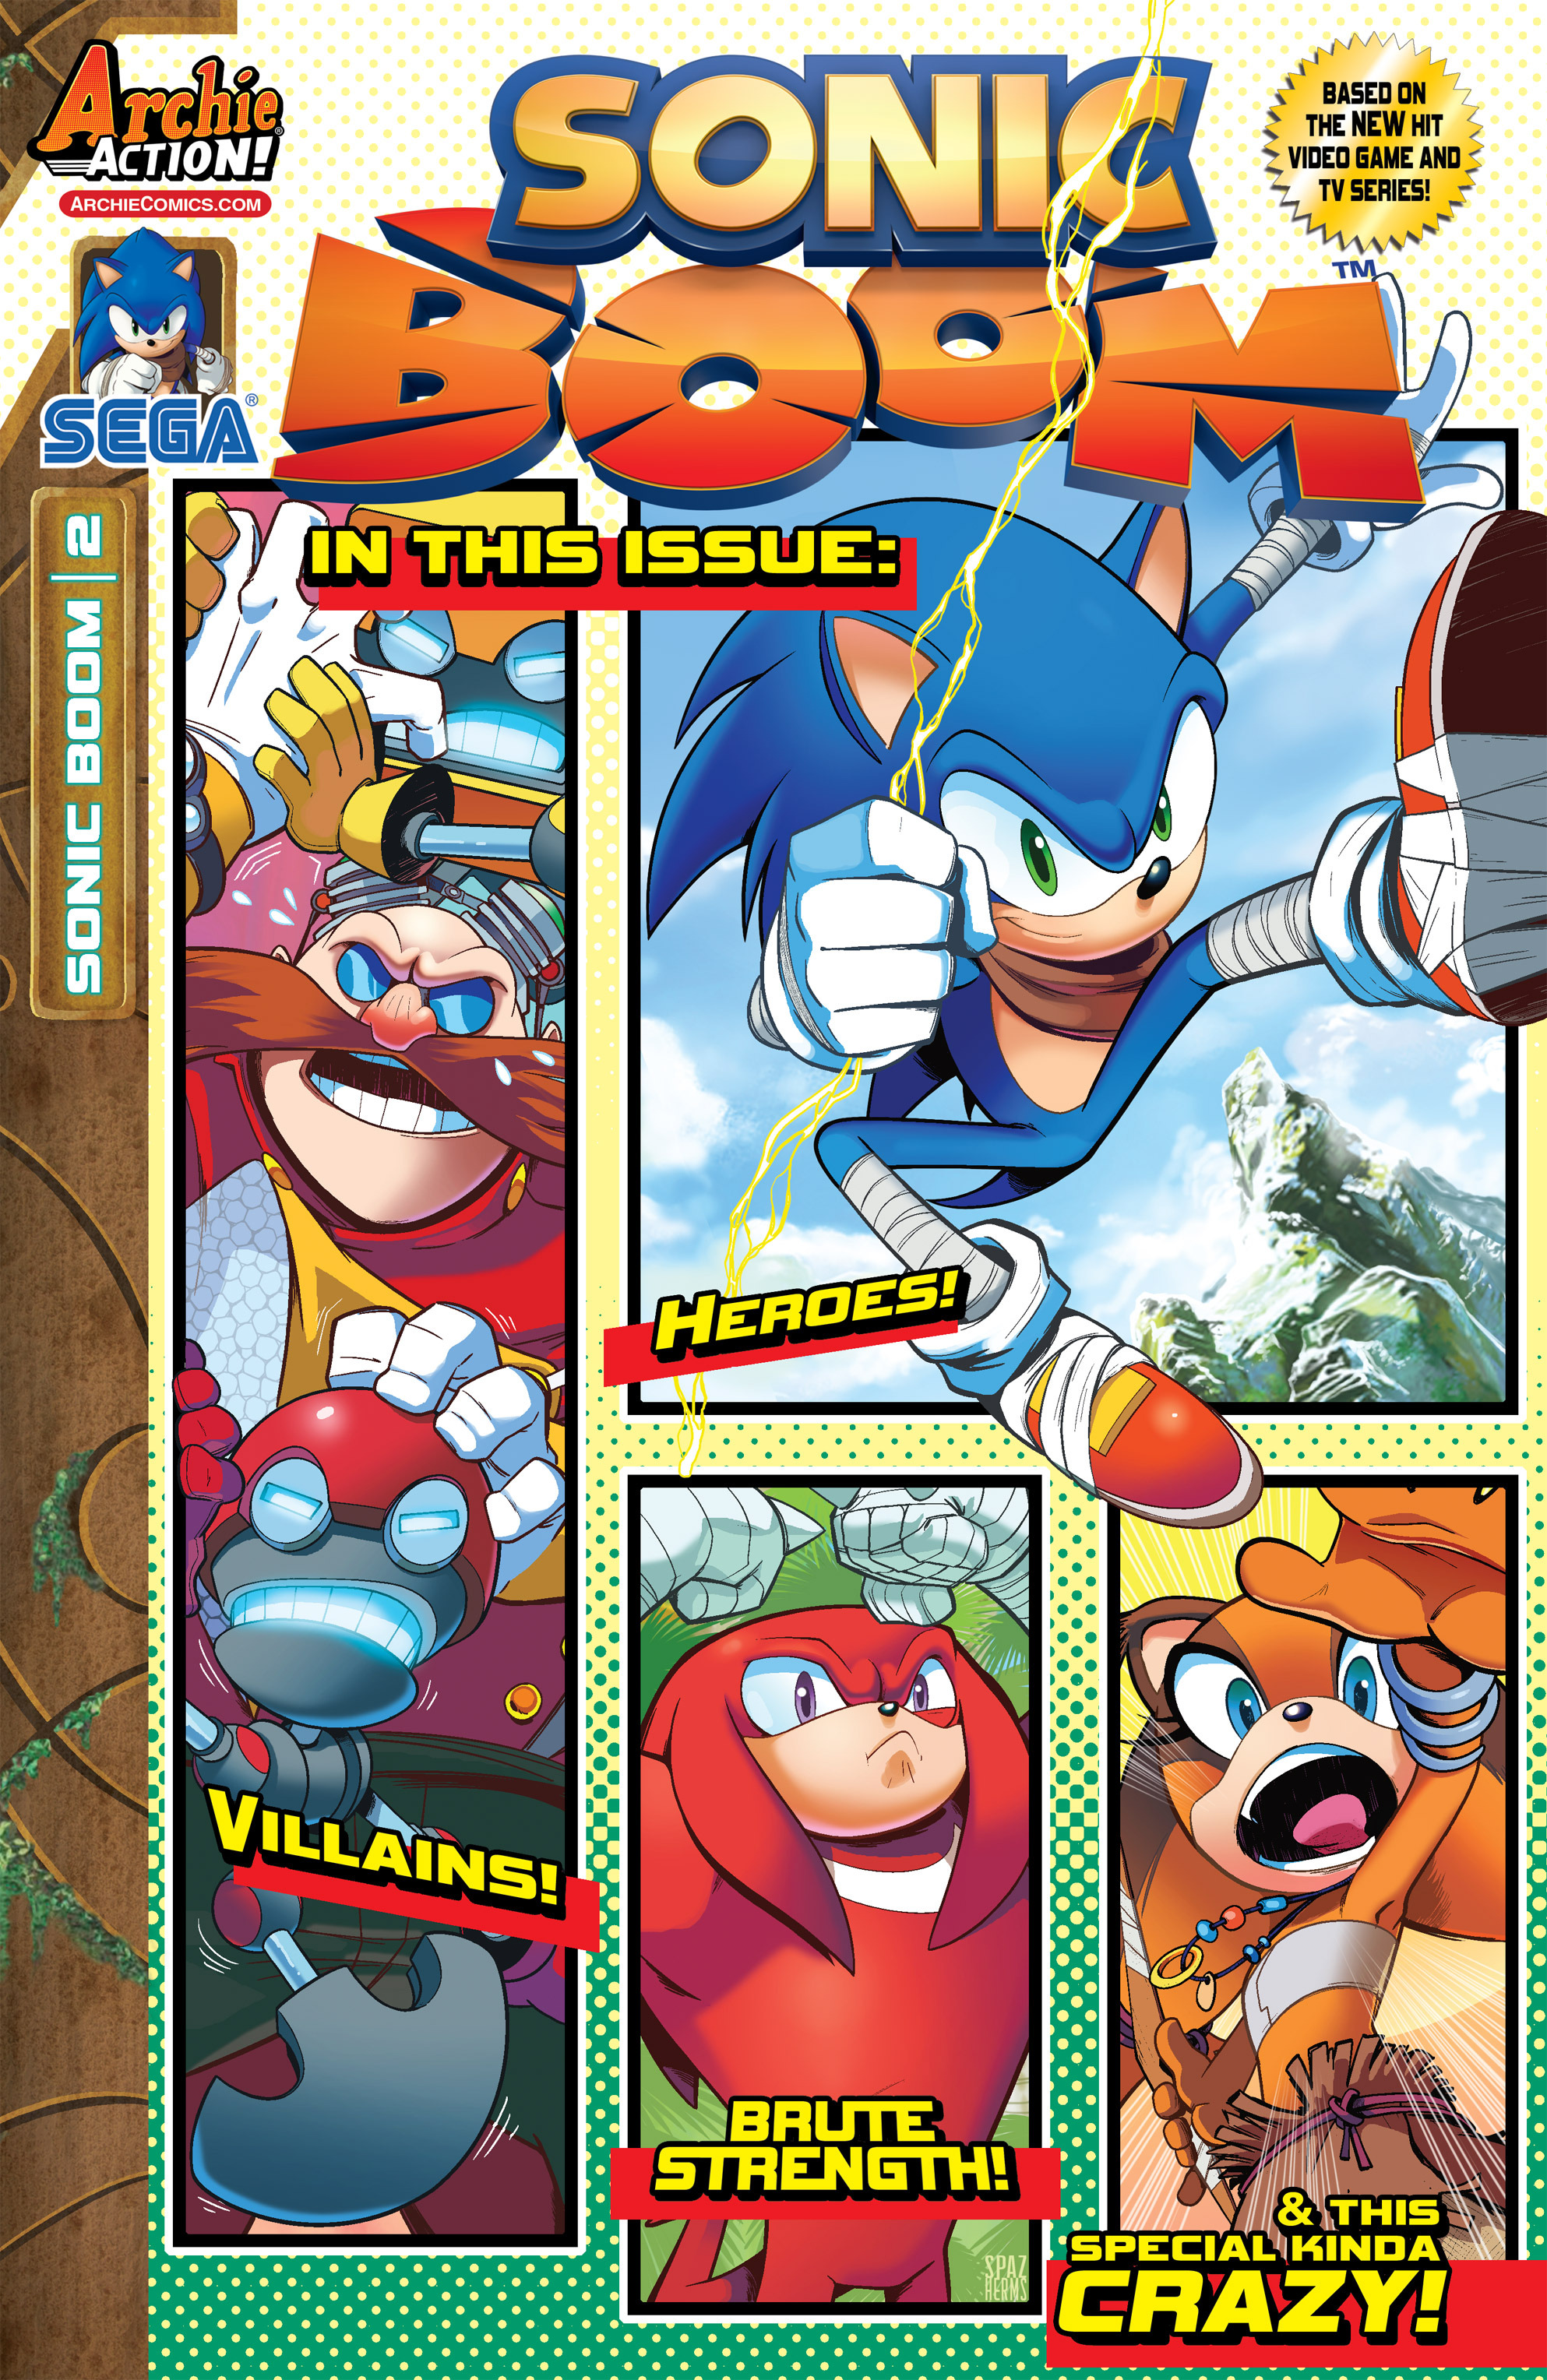 Archie Sonic Boom Issue 2  Sonic News Network  FANDOM powered by Wikia